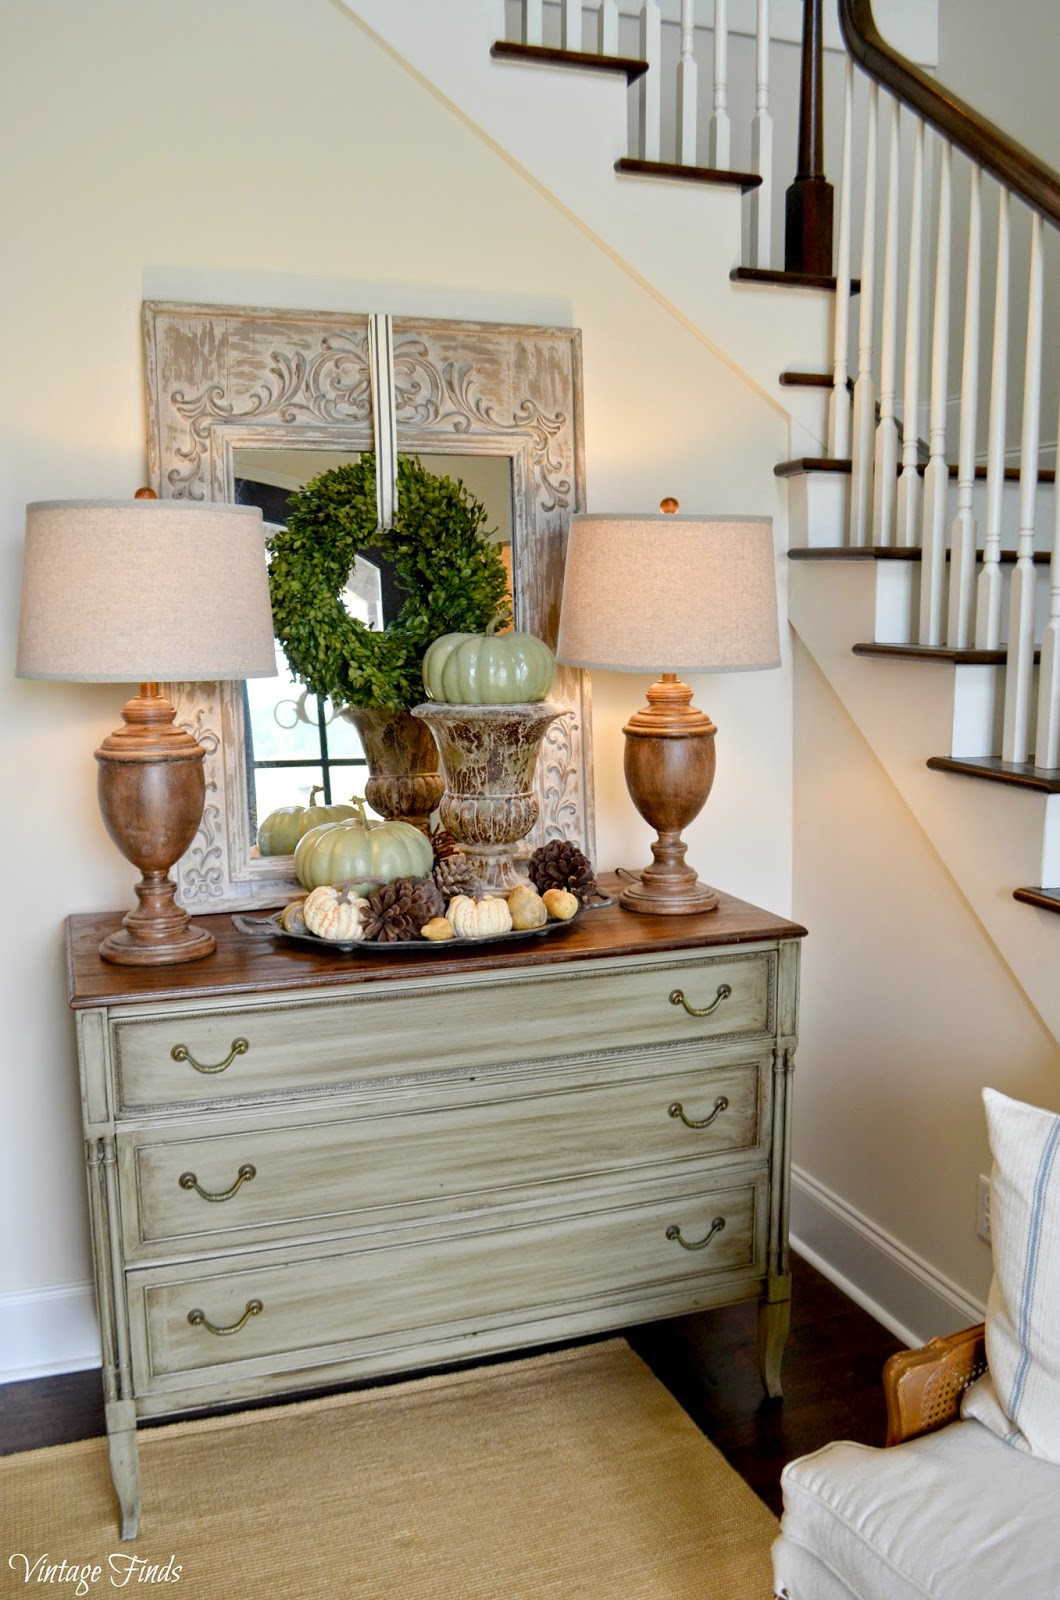 Fall Decor For Front Porch
 Vintage Finds Fall Front Porch and Foyer